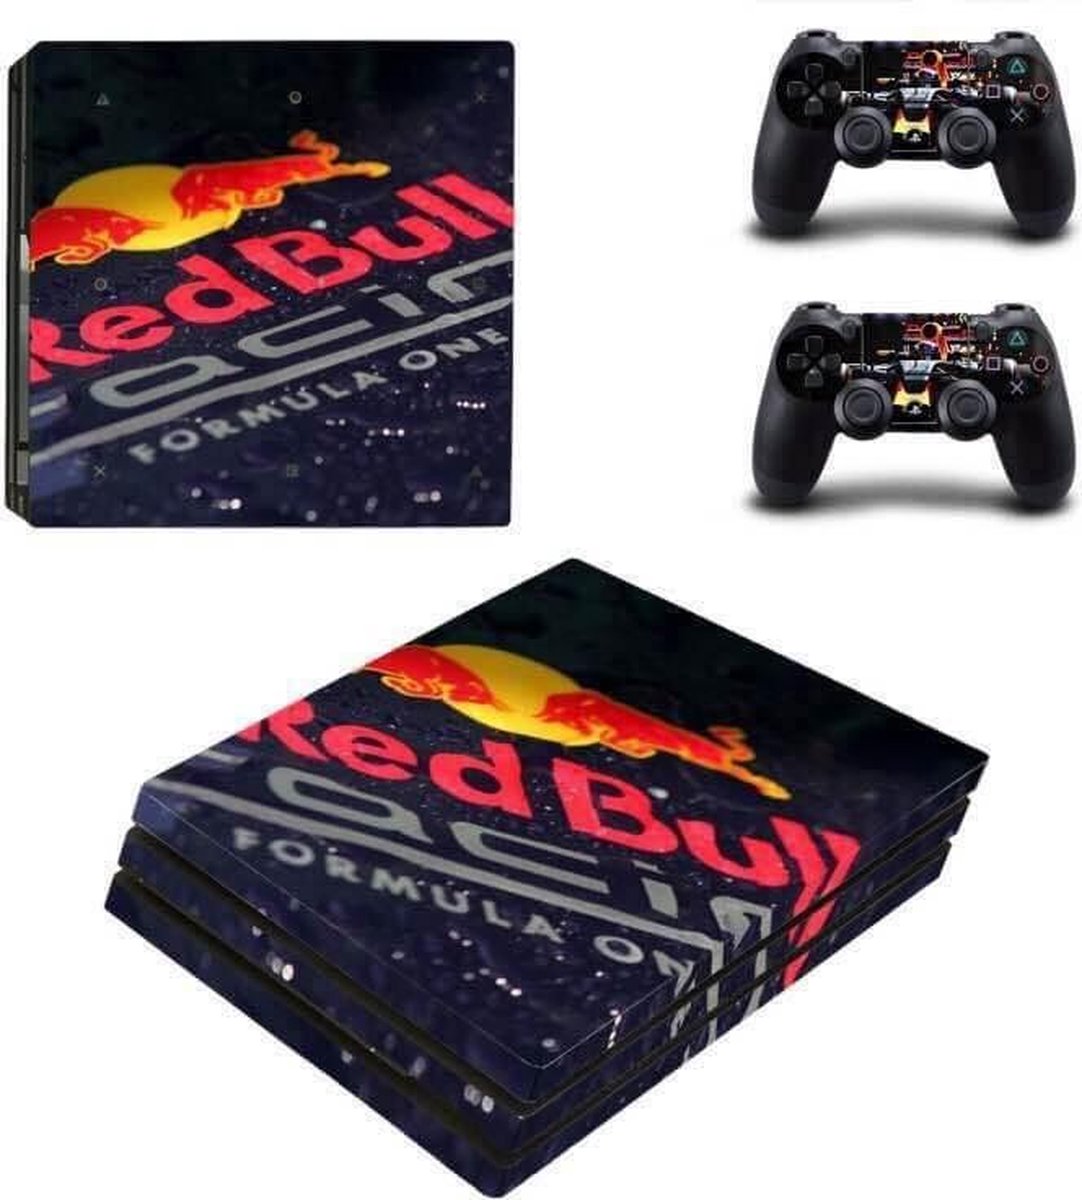 Artiest Ook Plunderen F1 Red Bull" PS4 Pro Skin - Consolestickers.nl - Customize Your Console